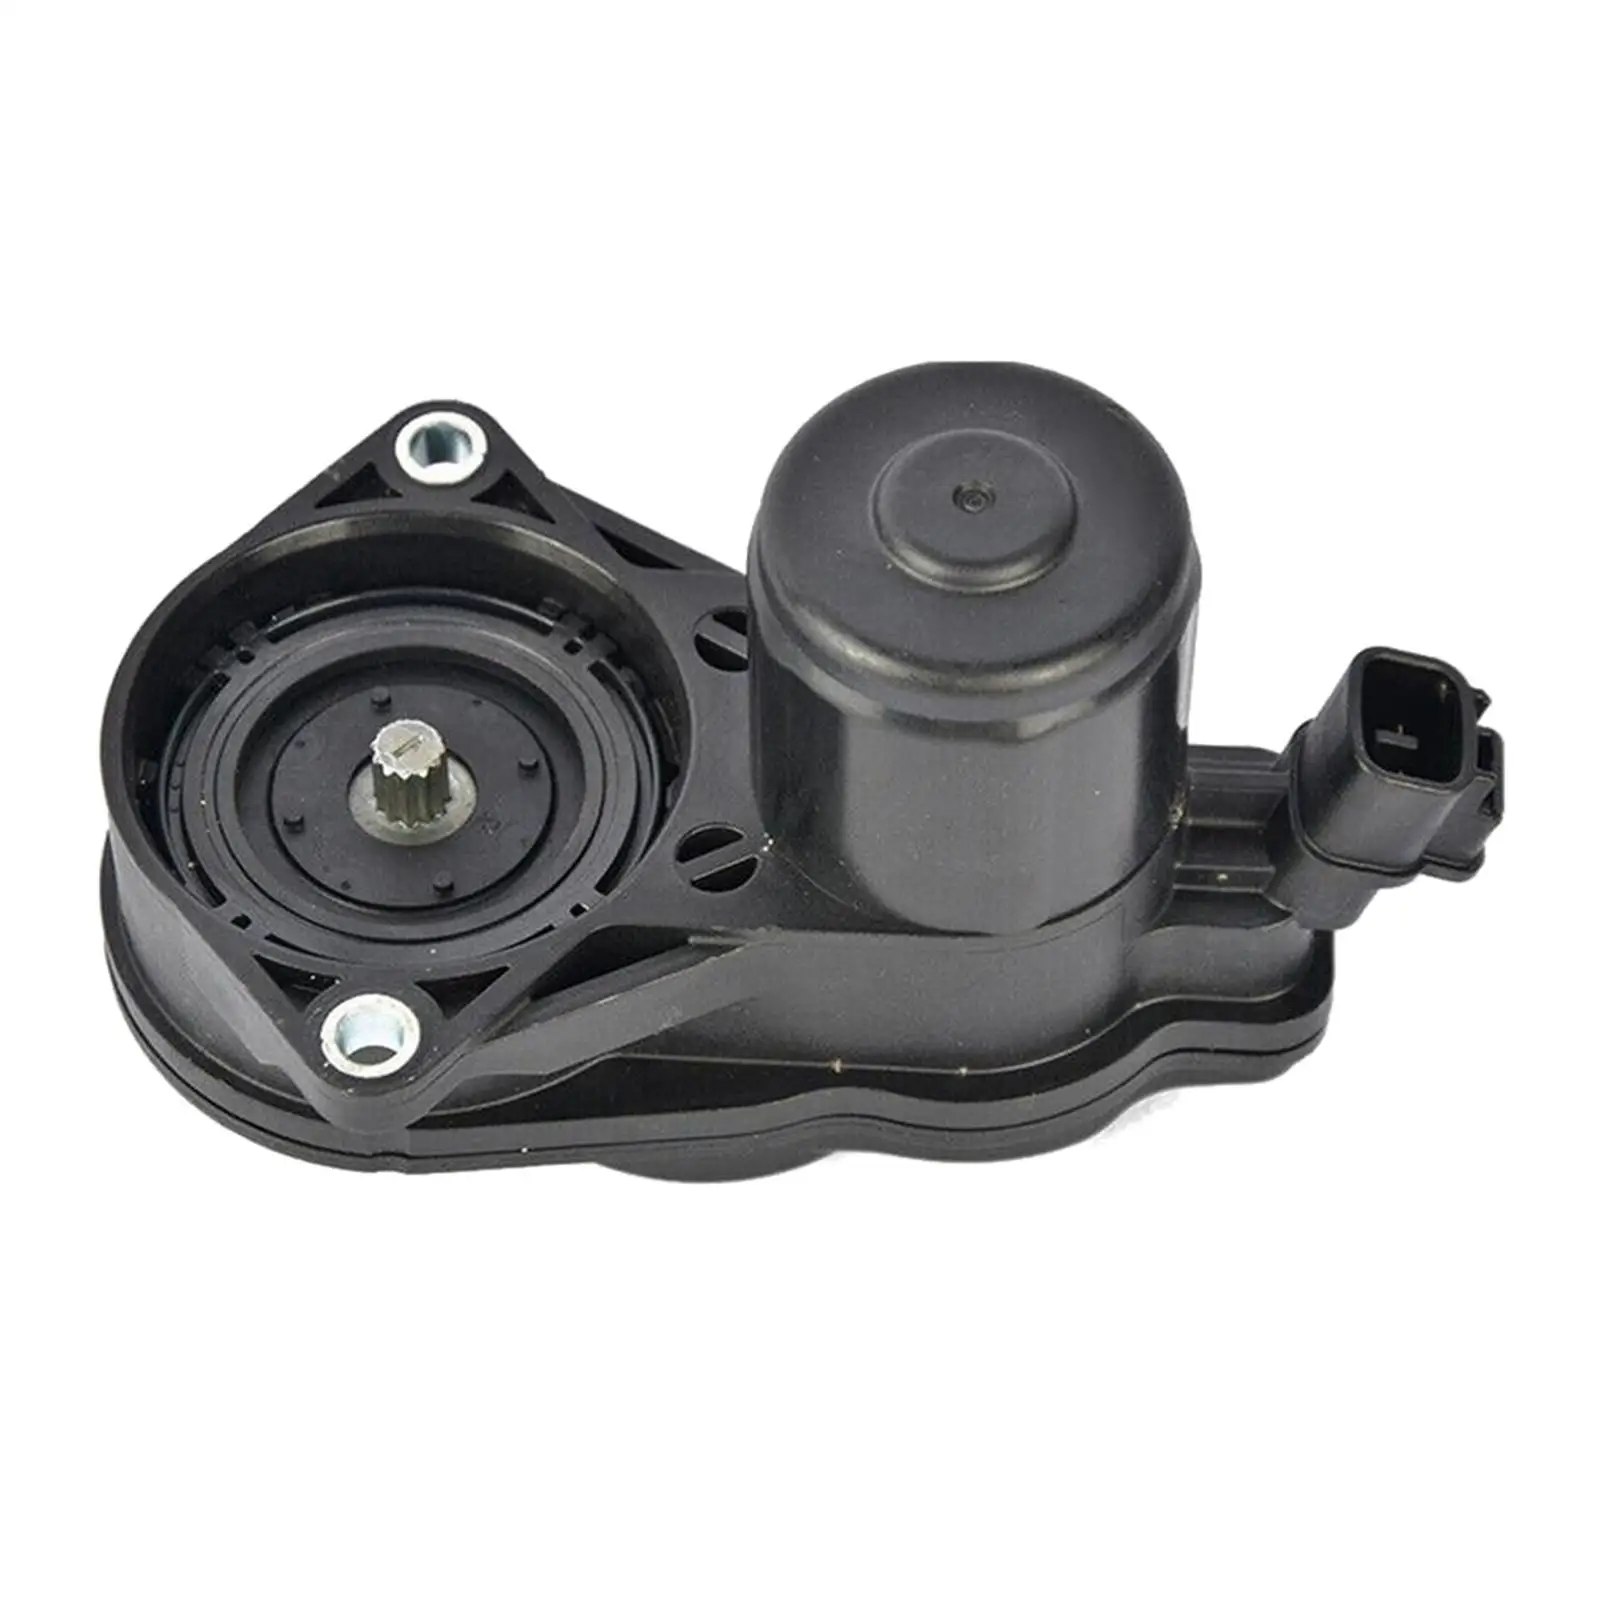 Parking Brake Actuator Replaces 46310-33010 Car Accessories for Toyota for c-hr for camry for sienna Easily Install